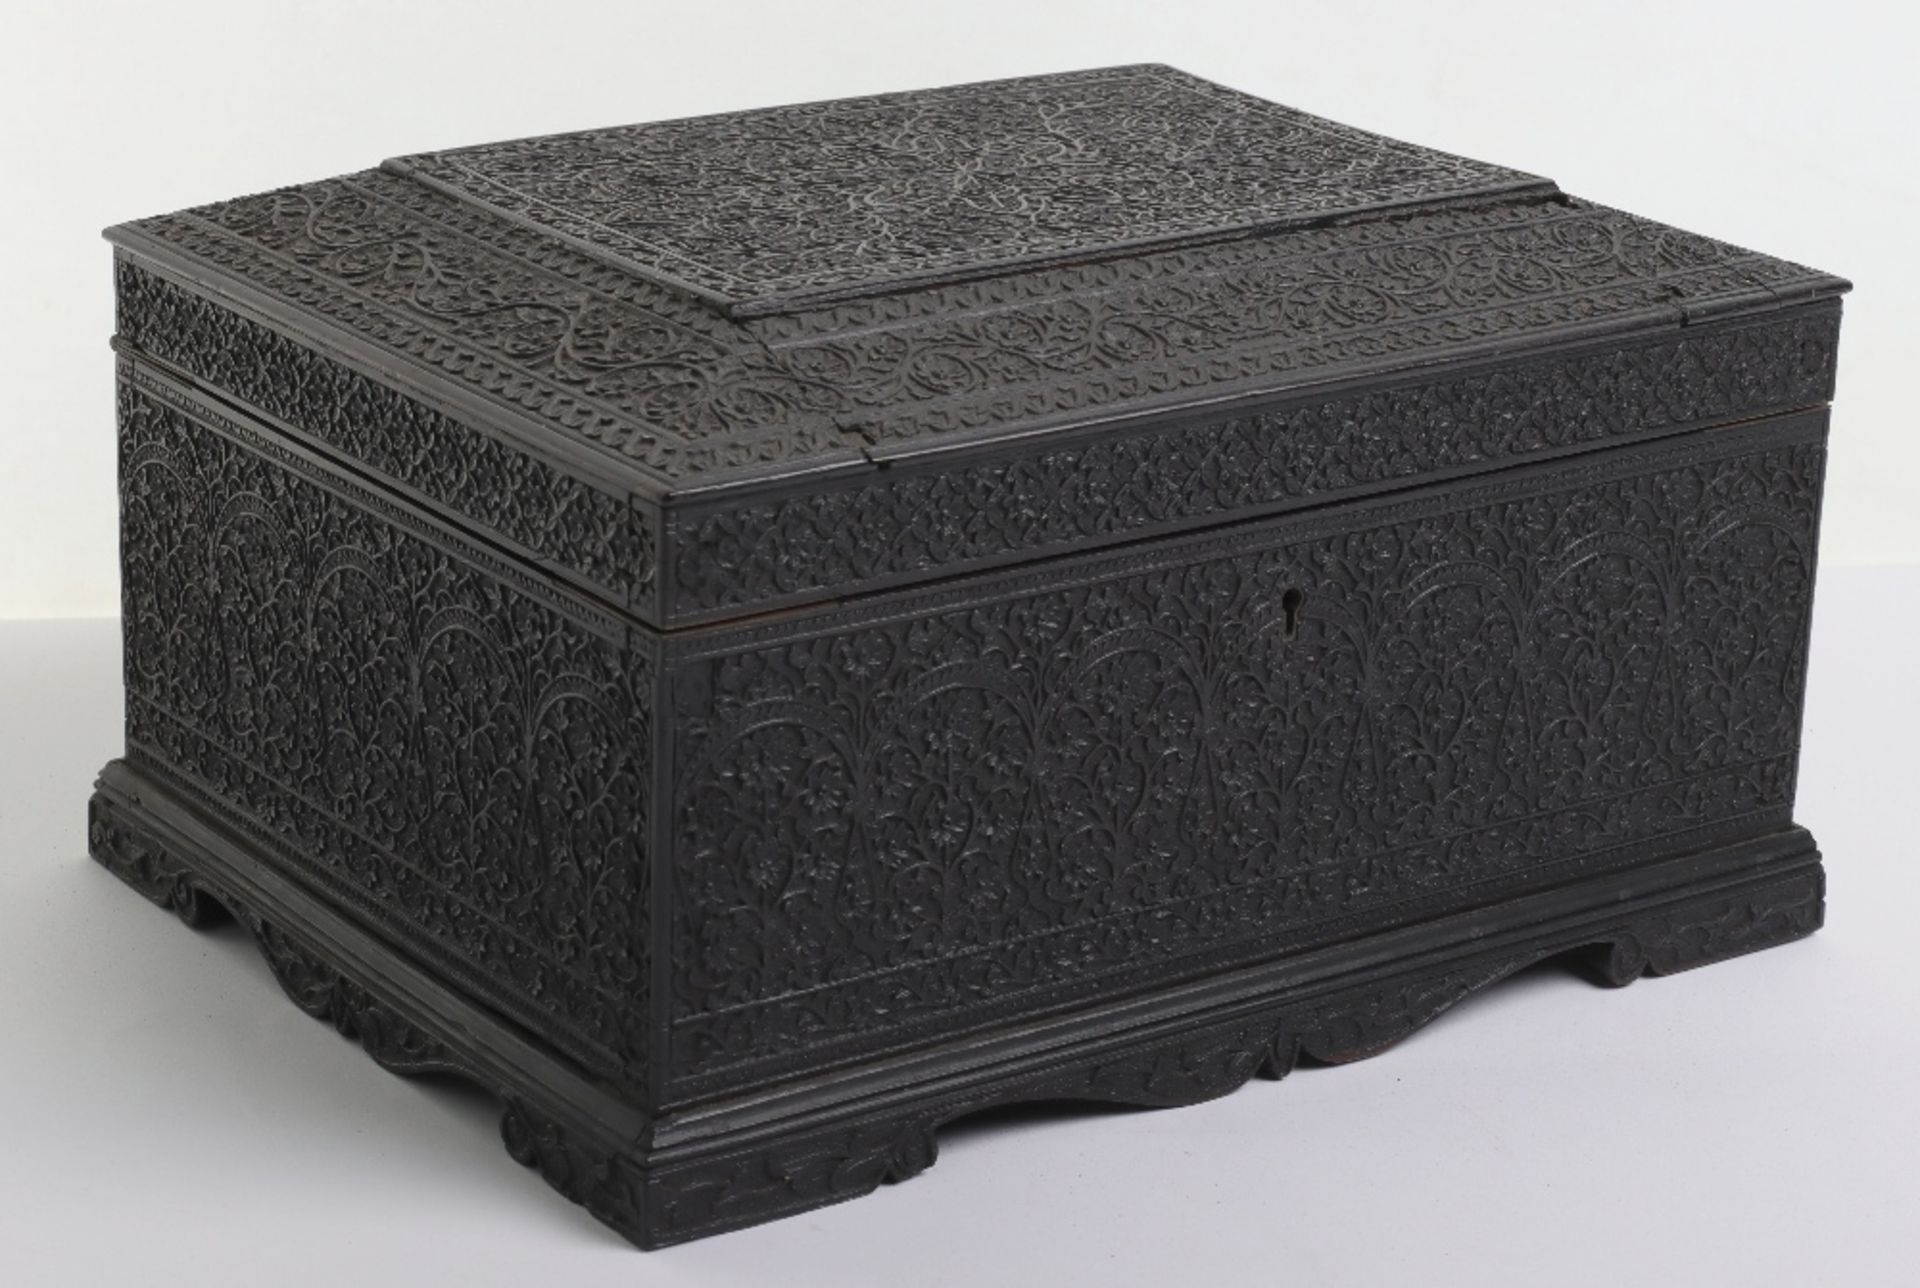 A fine Indian carved sandalwood casket, 19th century, probably Mysore - Image 3 of 5